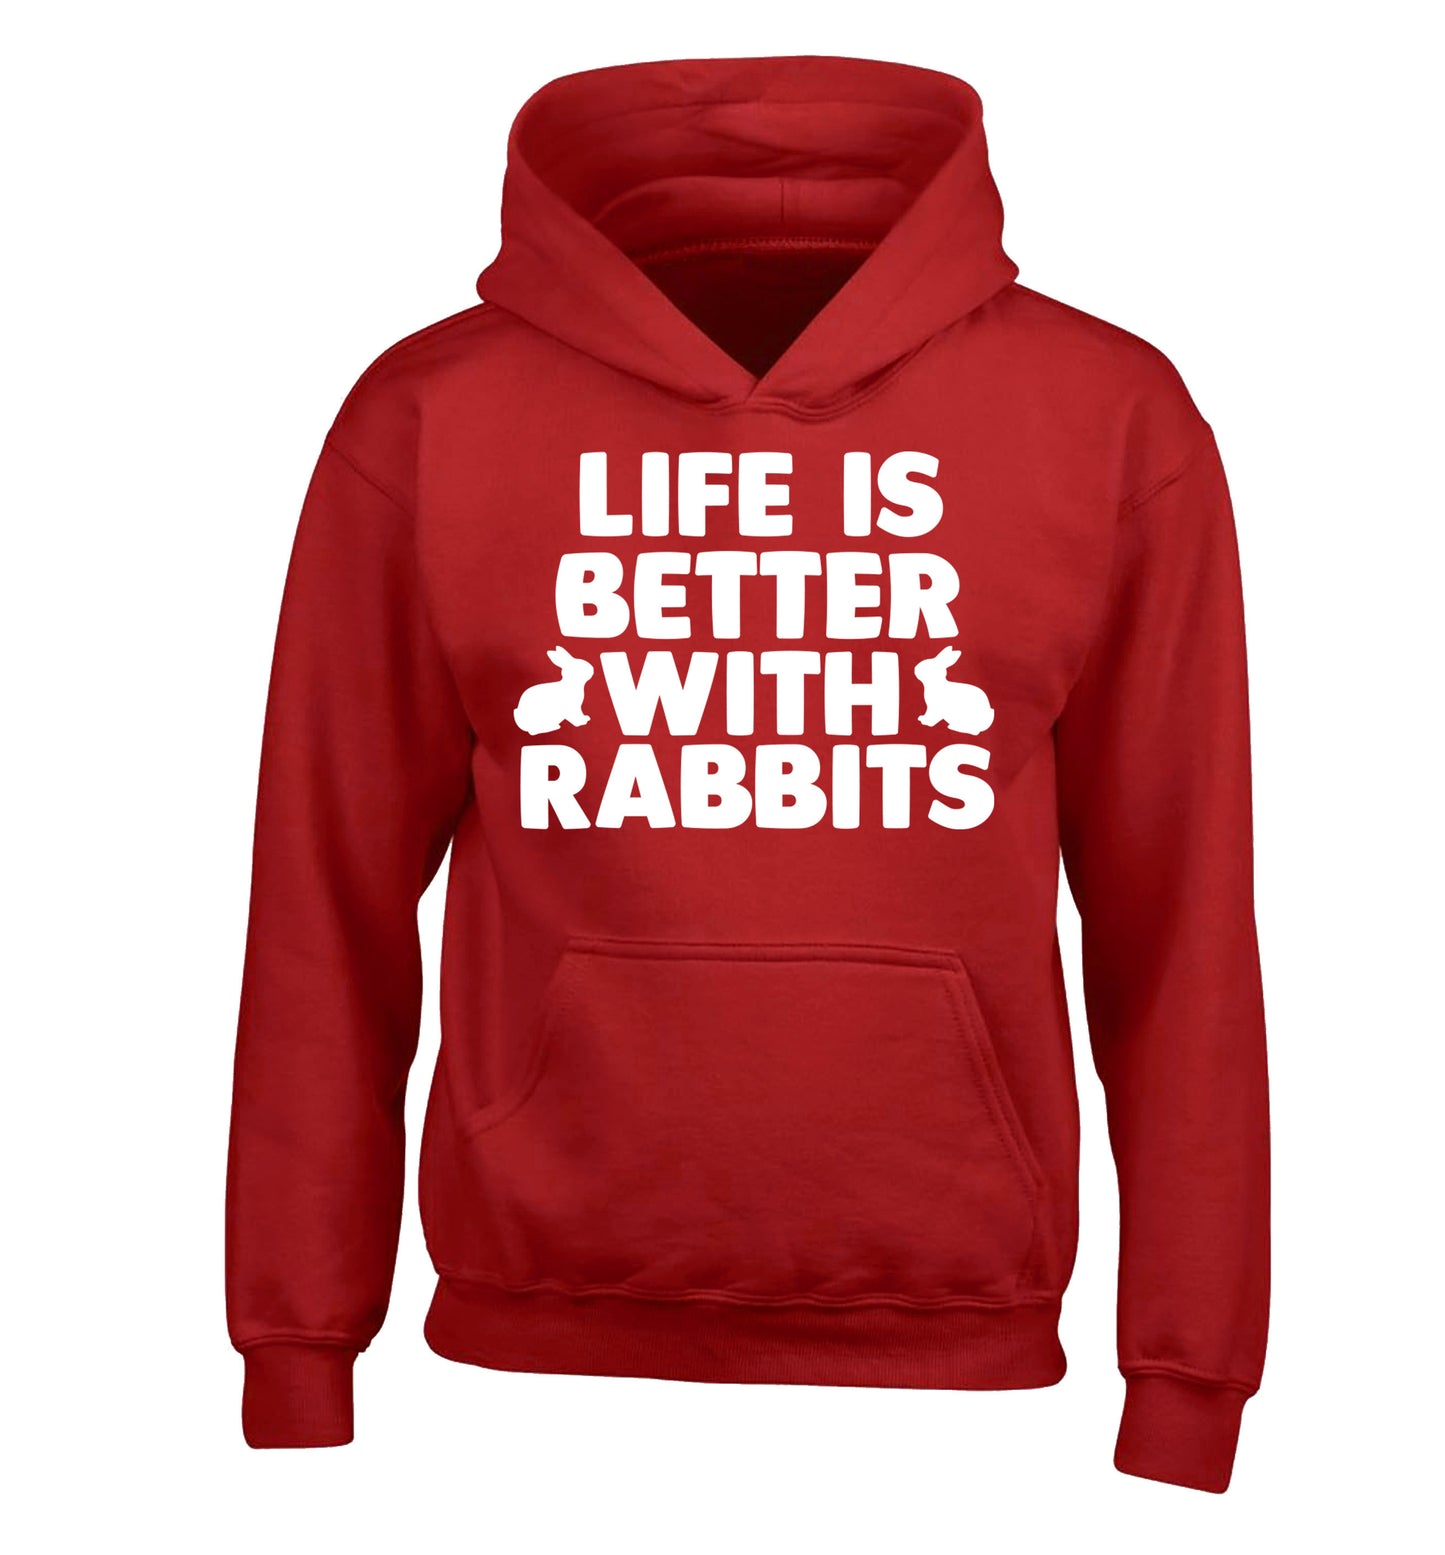 Life is better with rabbits children's red hoodie 12-14 Years